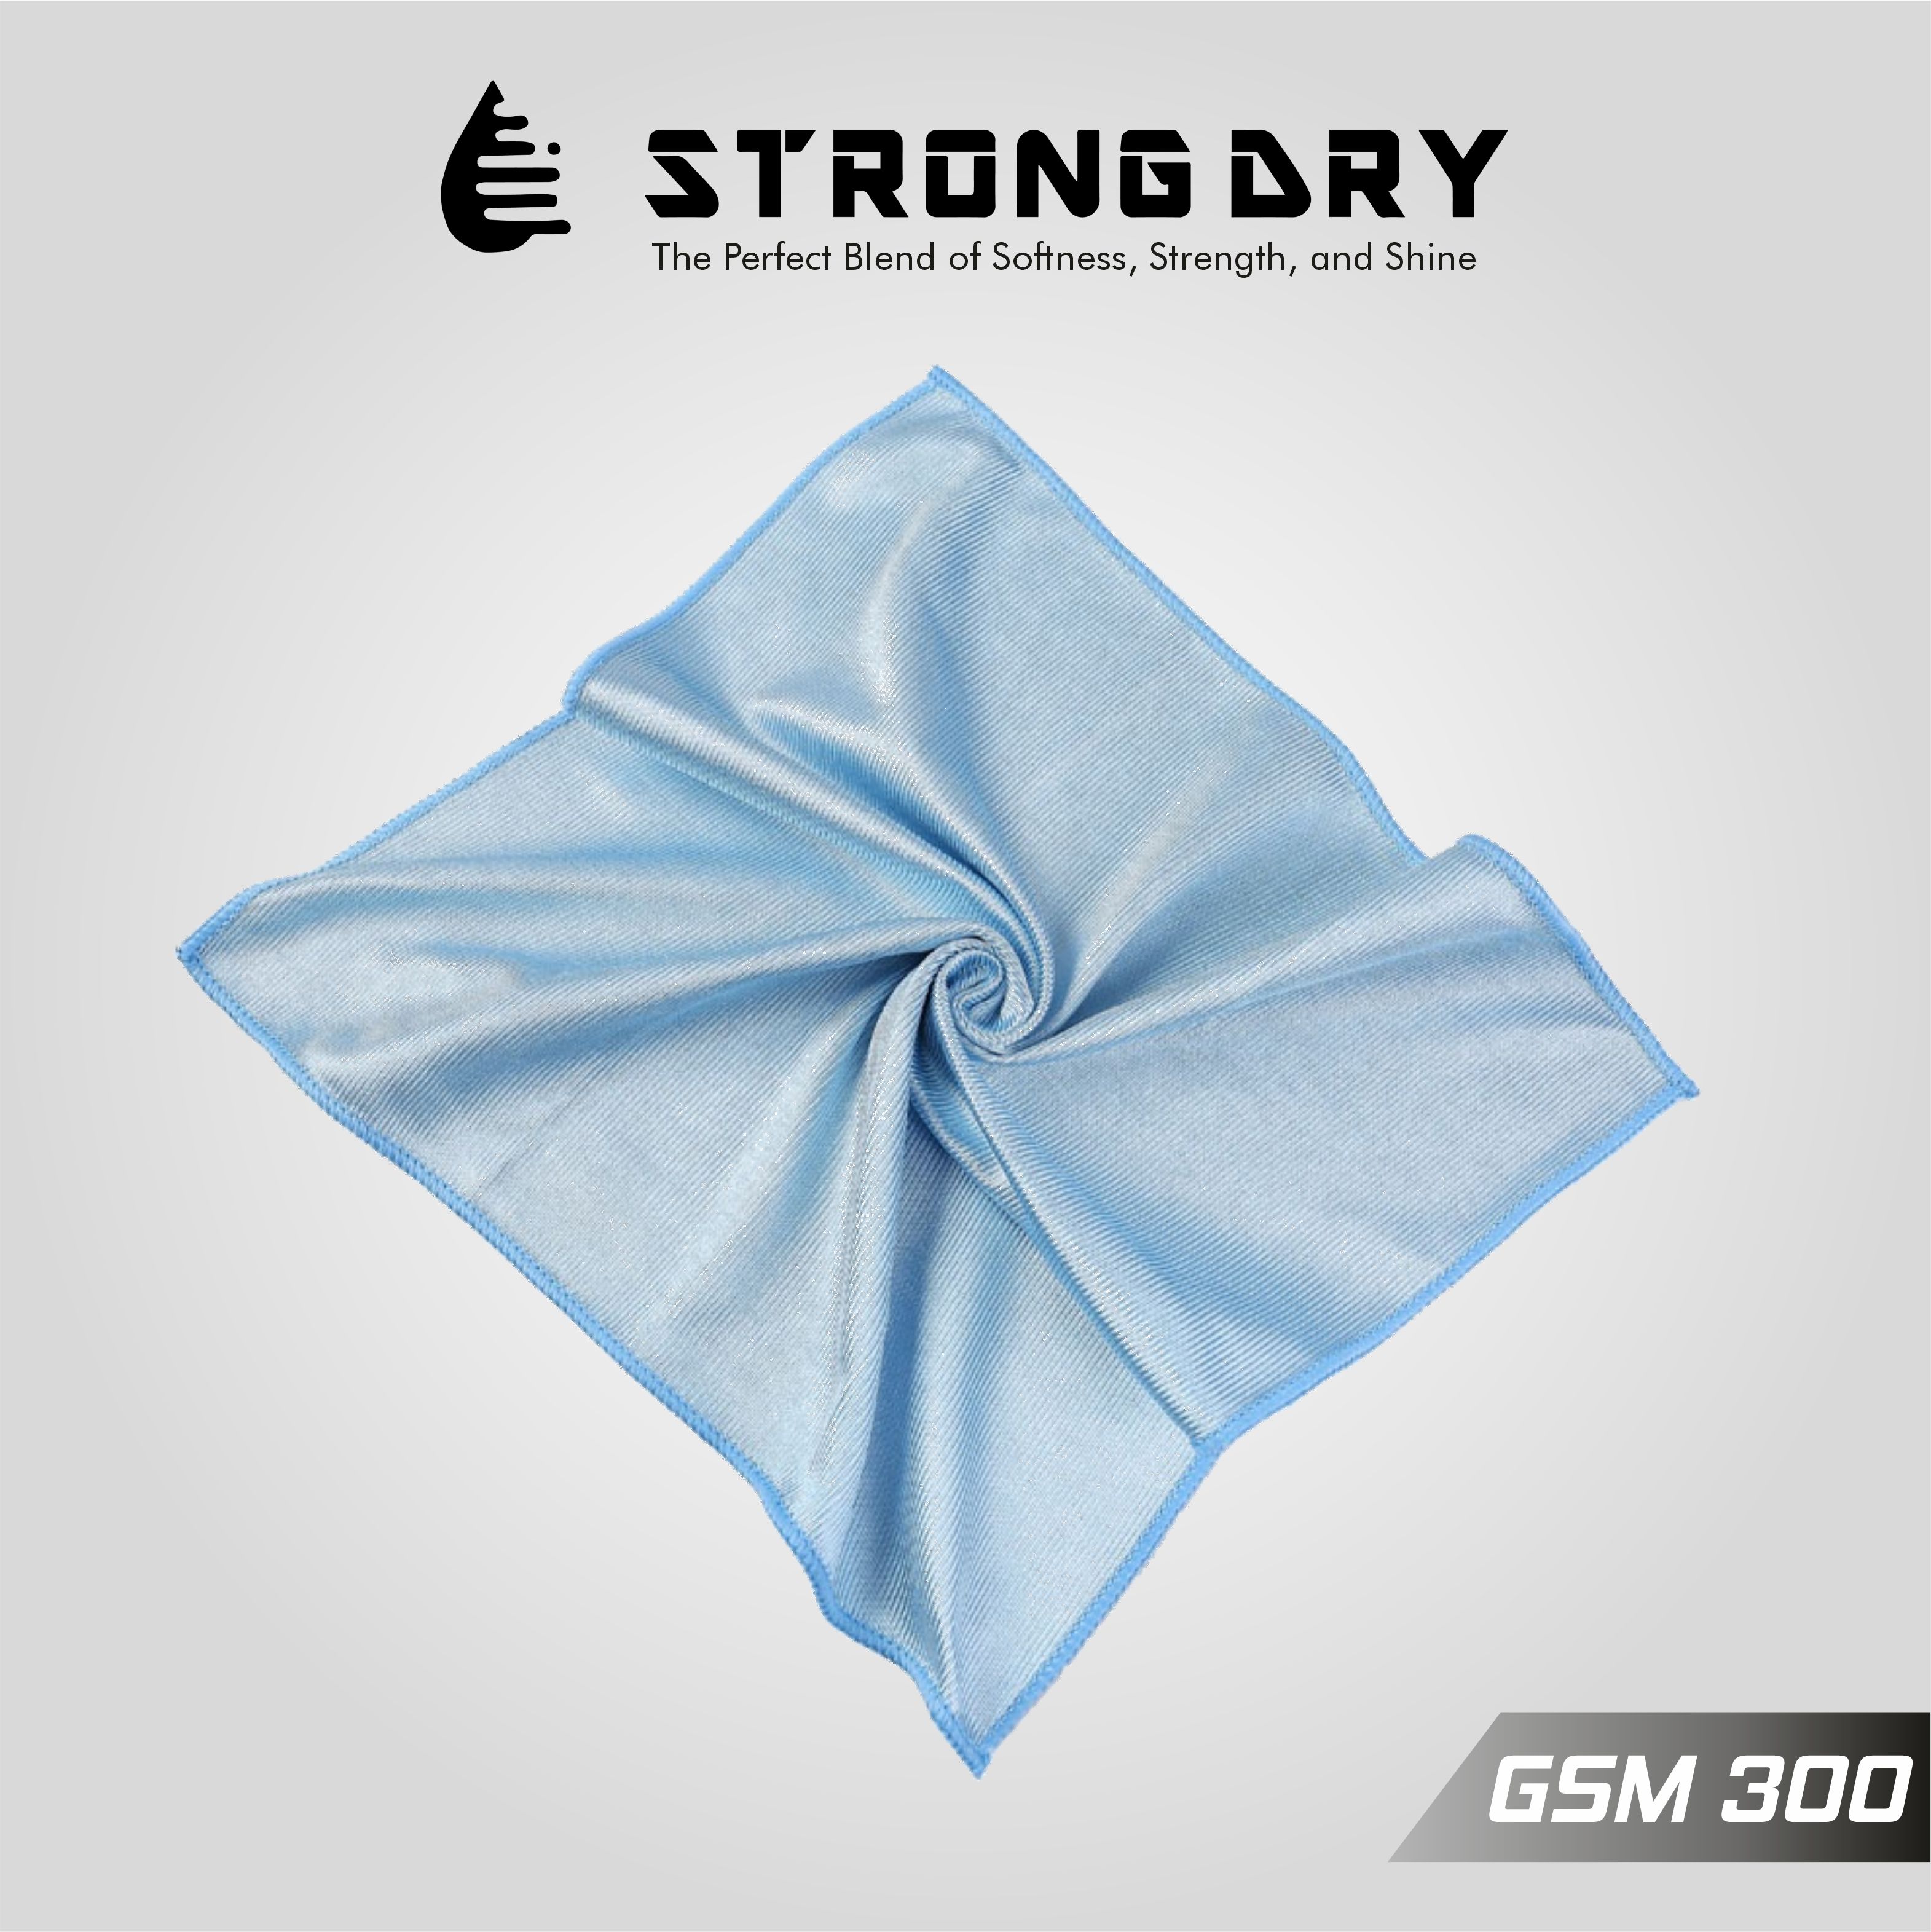 GLASS CLEANING MICROFIBER CLOTH (BLUE COLOUR)